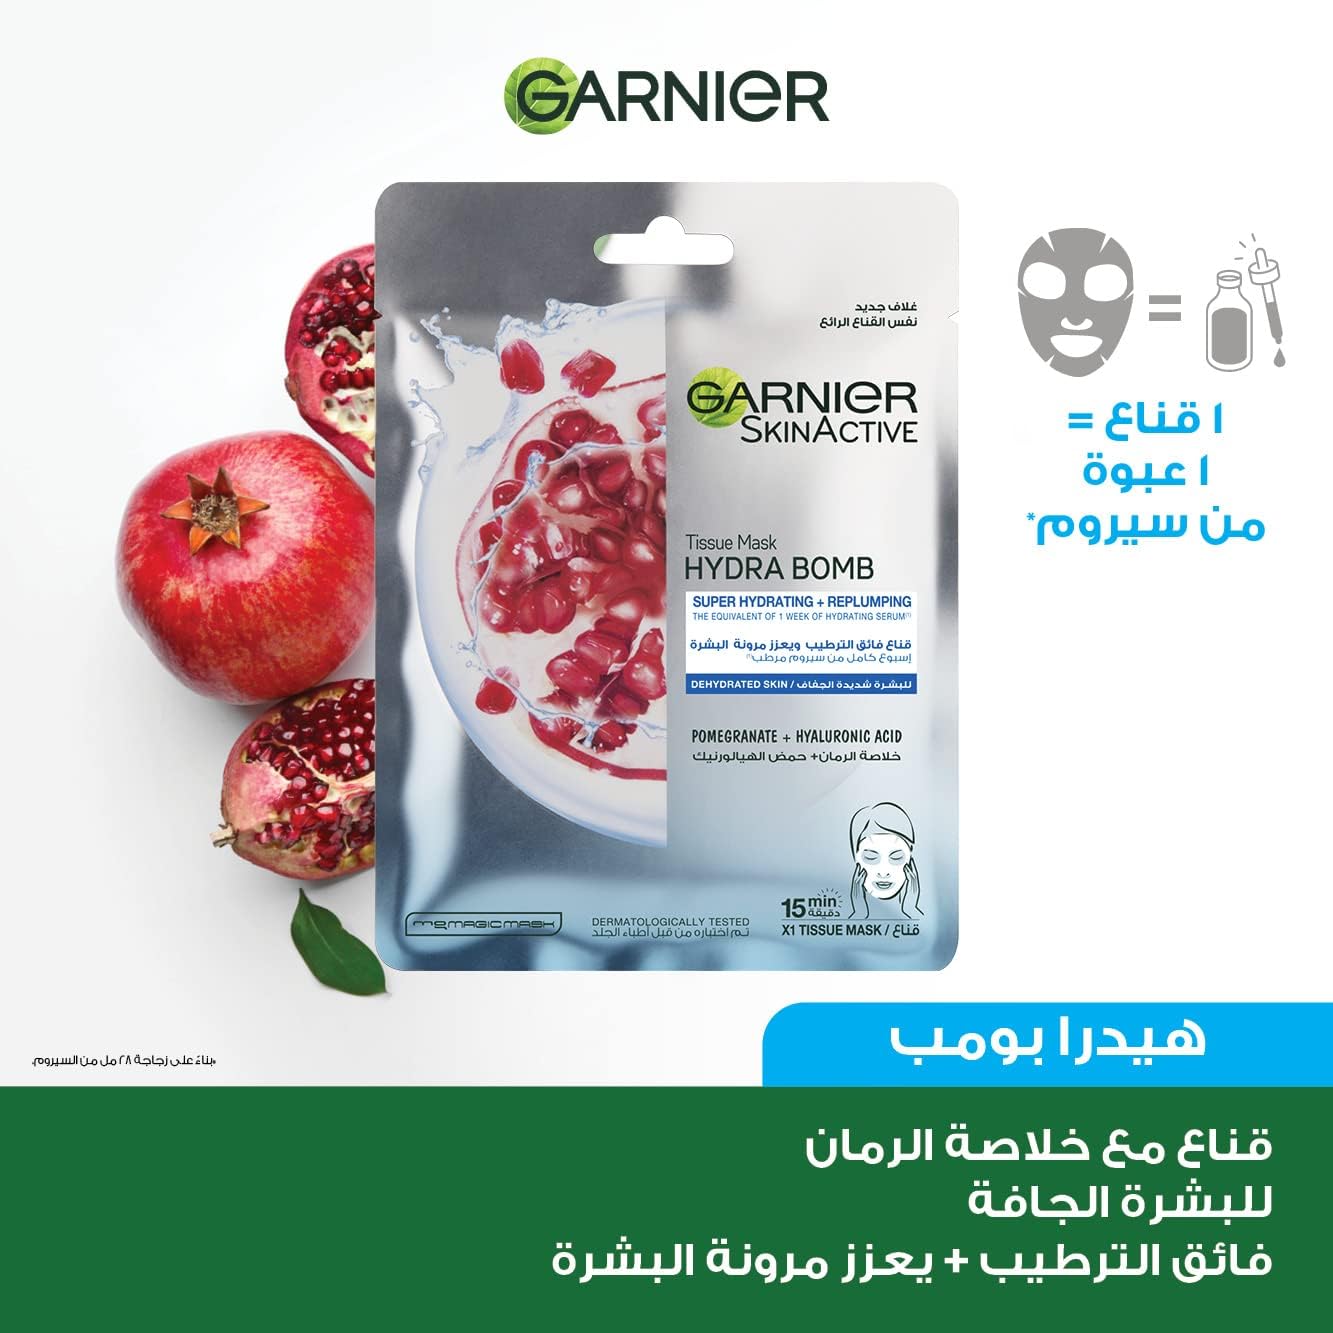 Garnier Skinactive Pomegranate Hydrating Face Tissue Mask For Dehydrated Skin 28G